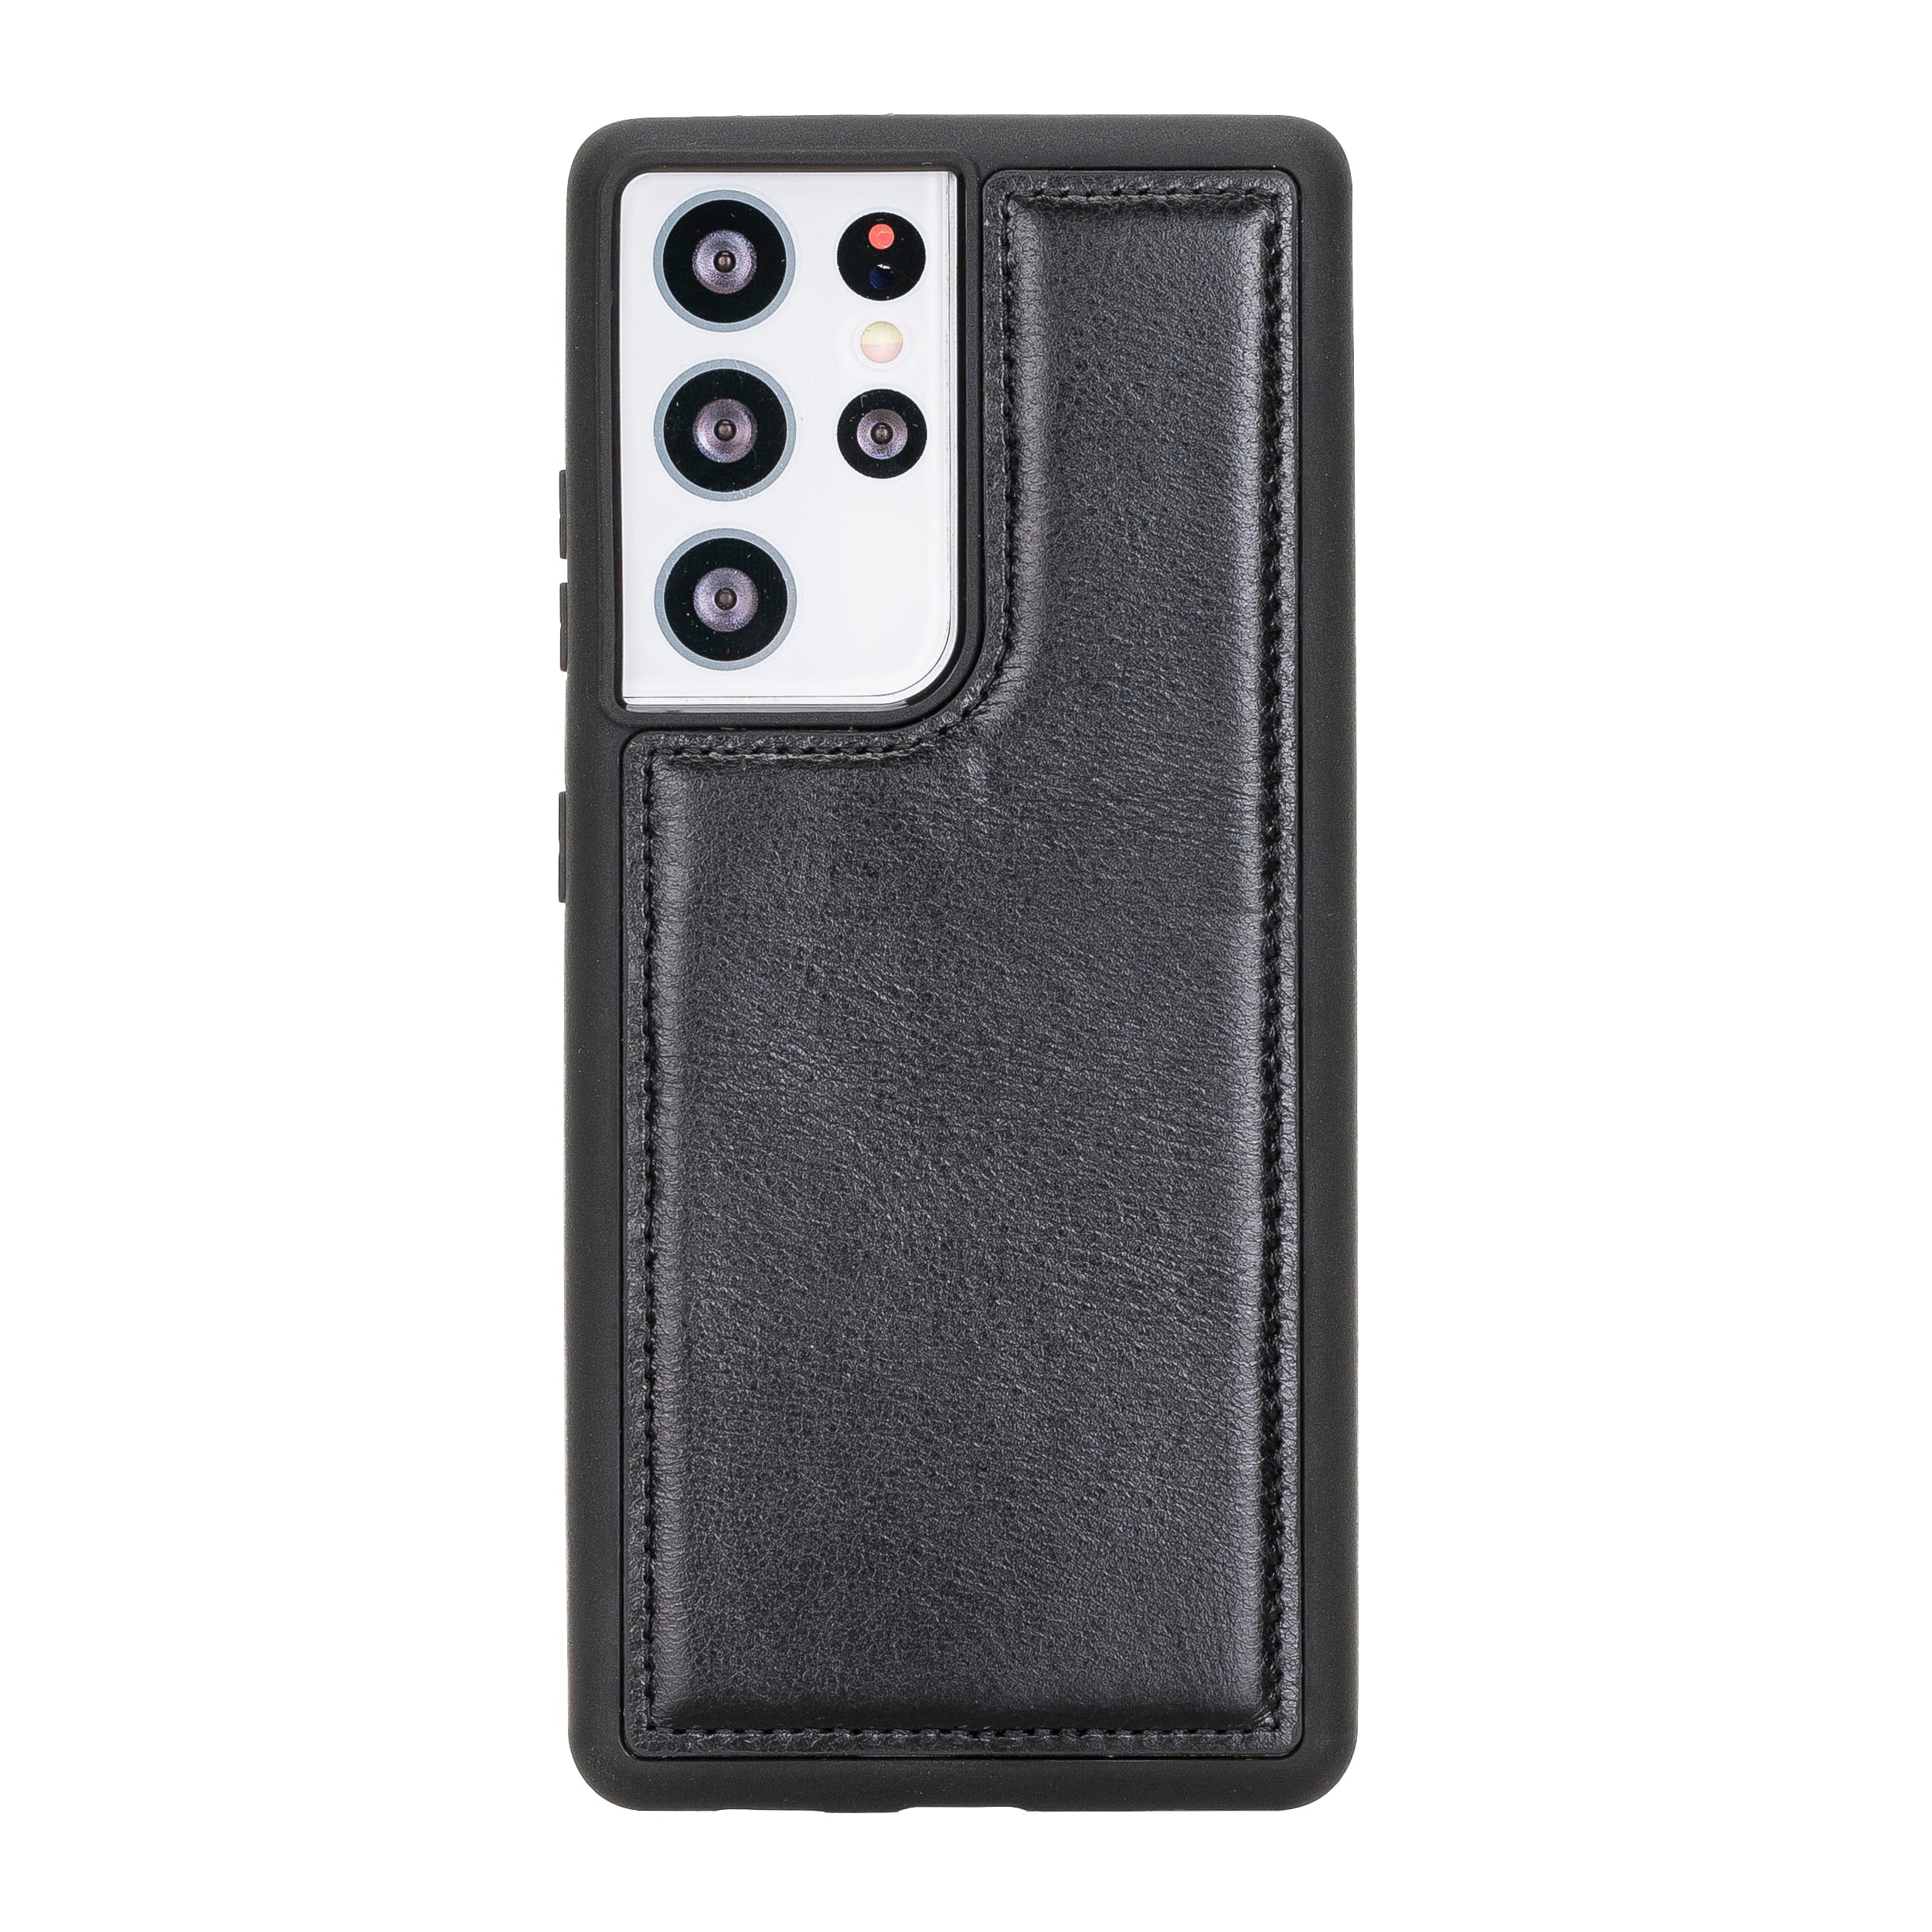 Leather Wallet Case for Samsung Galaxy S21 Ultra